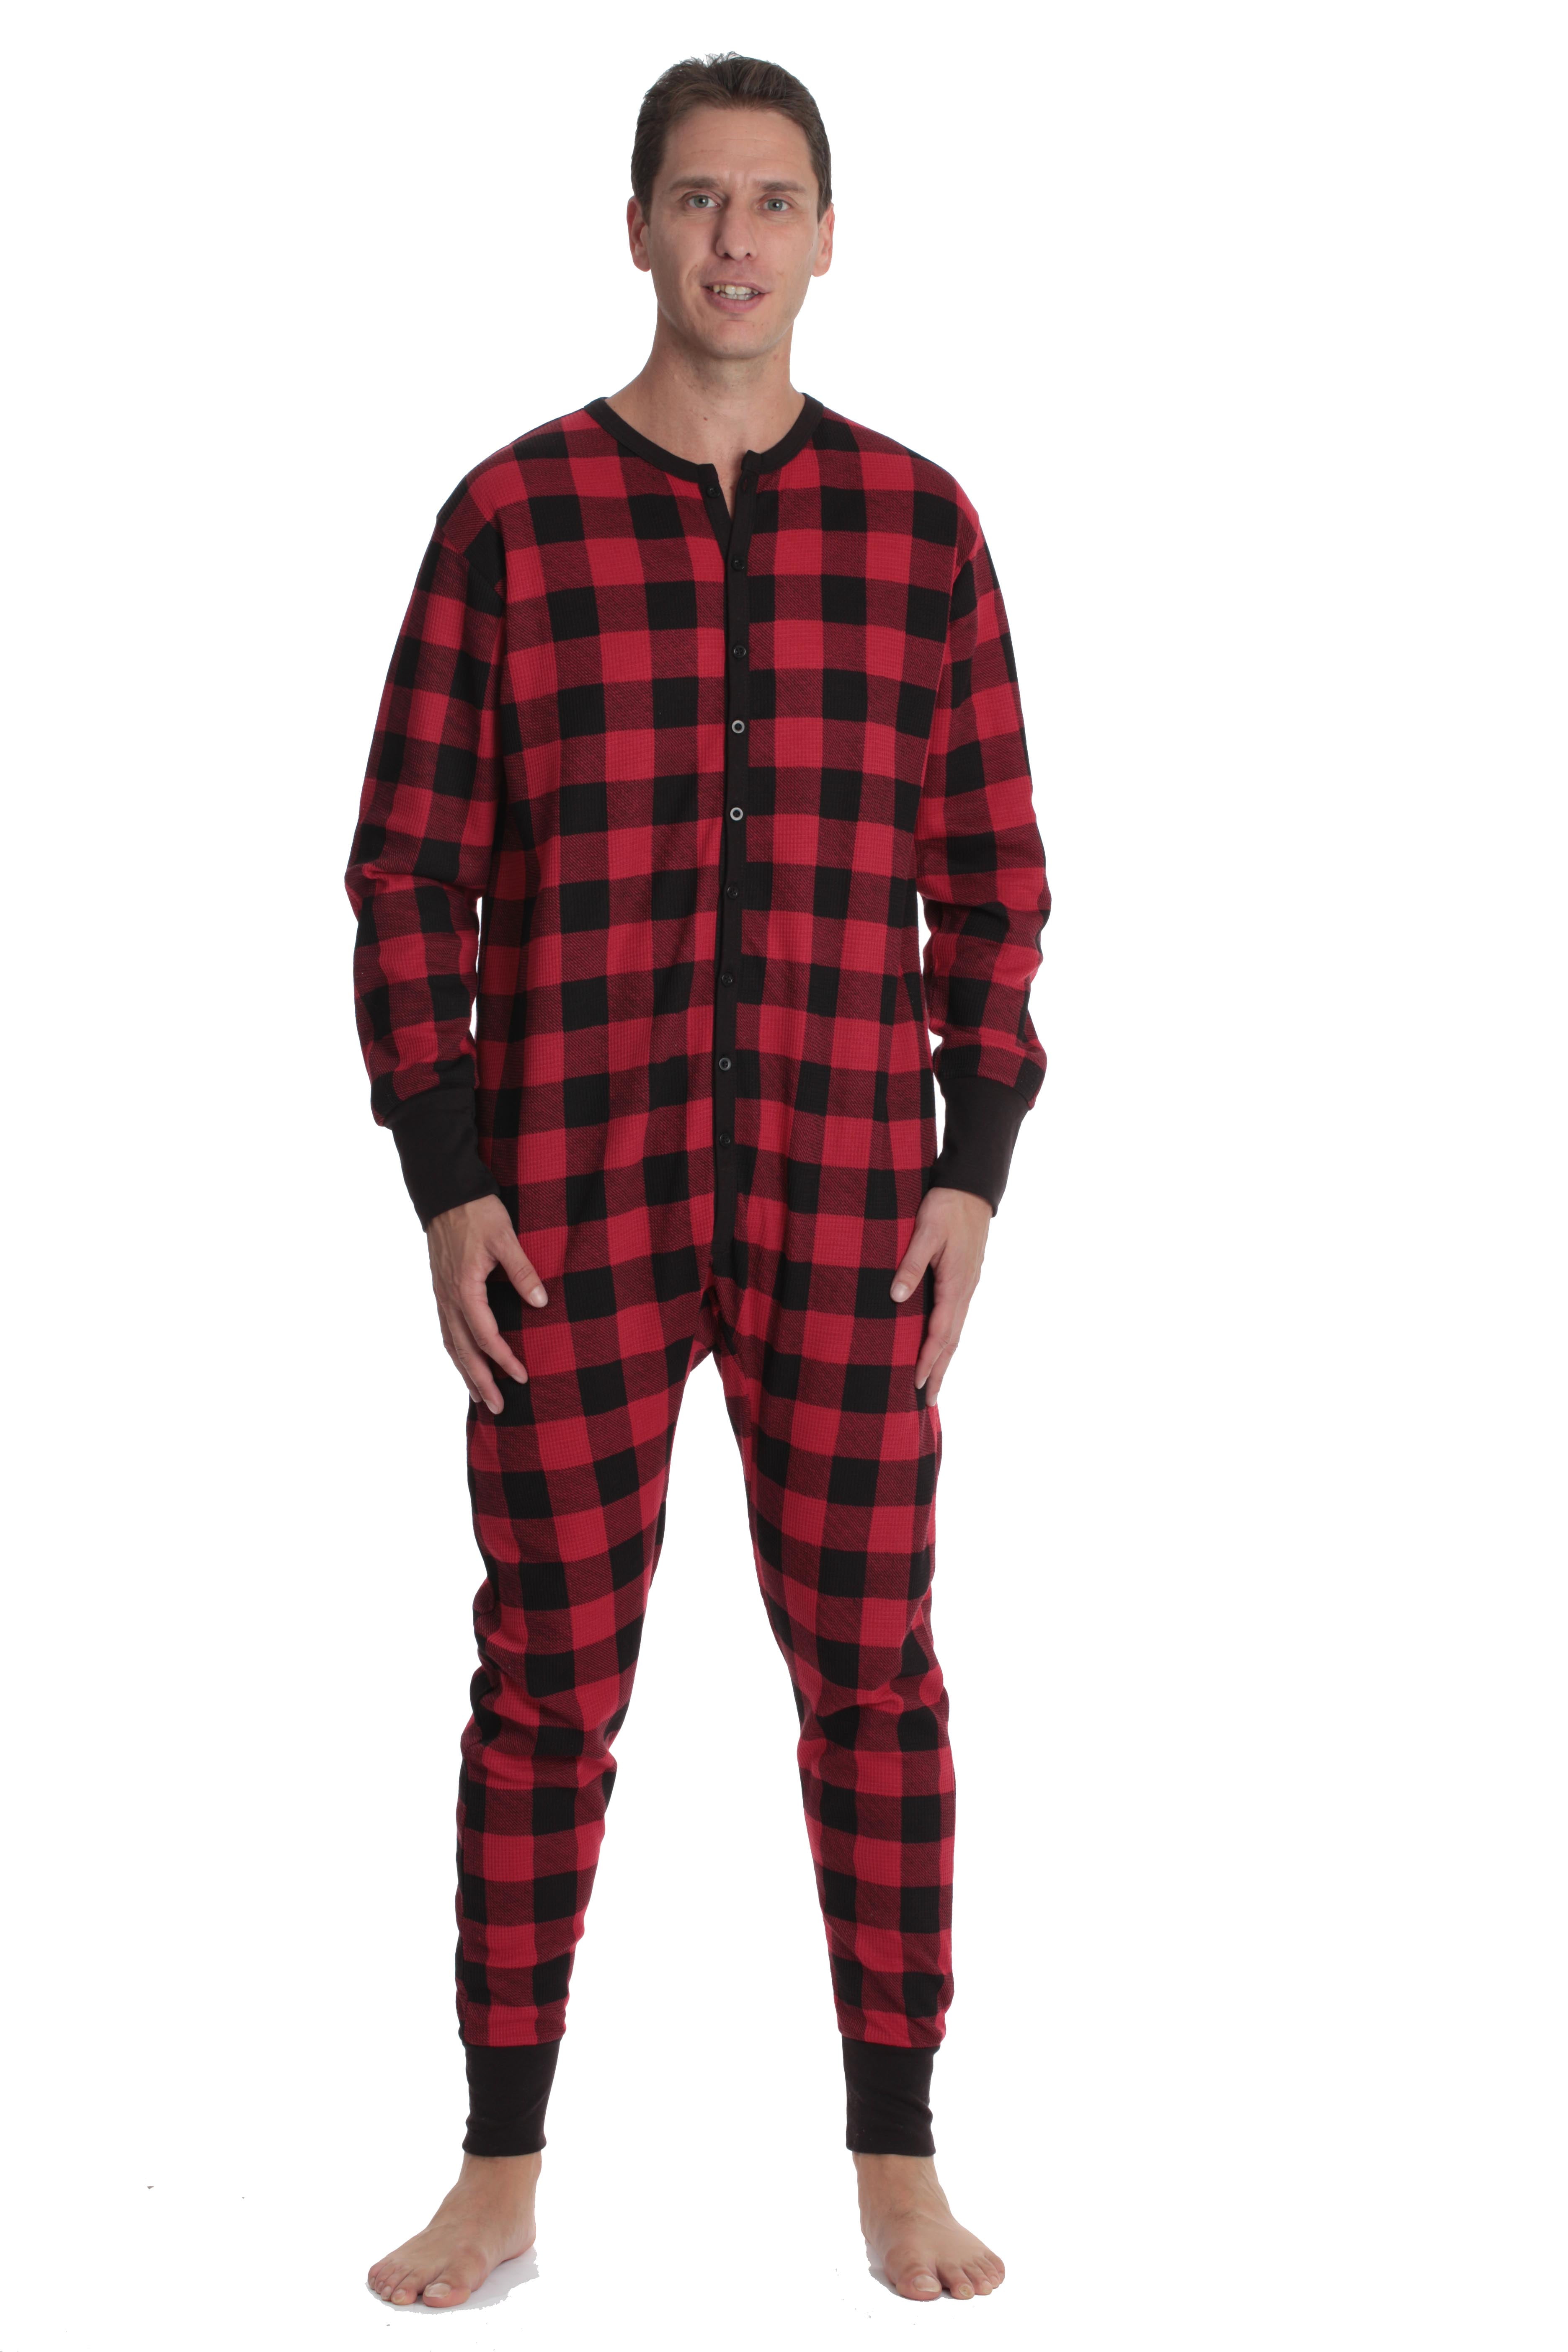 followme Men's Solid Thermal Henley Adult Onesie (Red - Buffalo Plaid,  Small) 